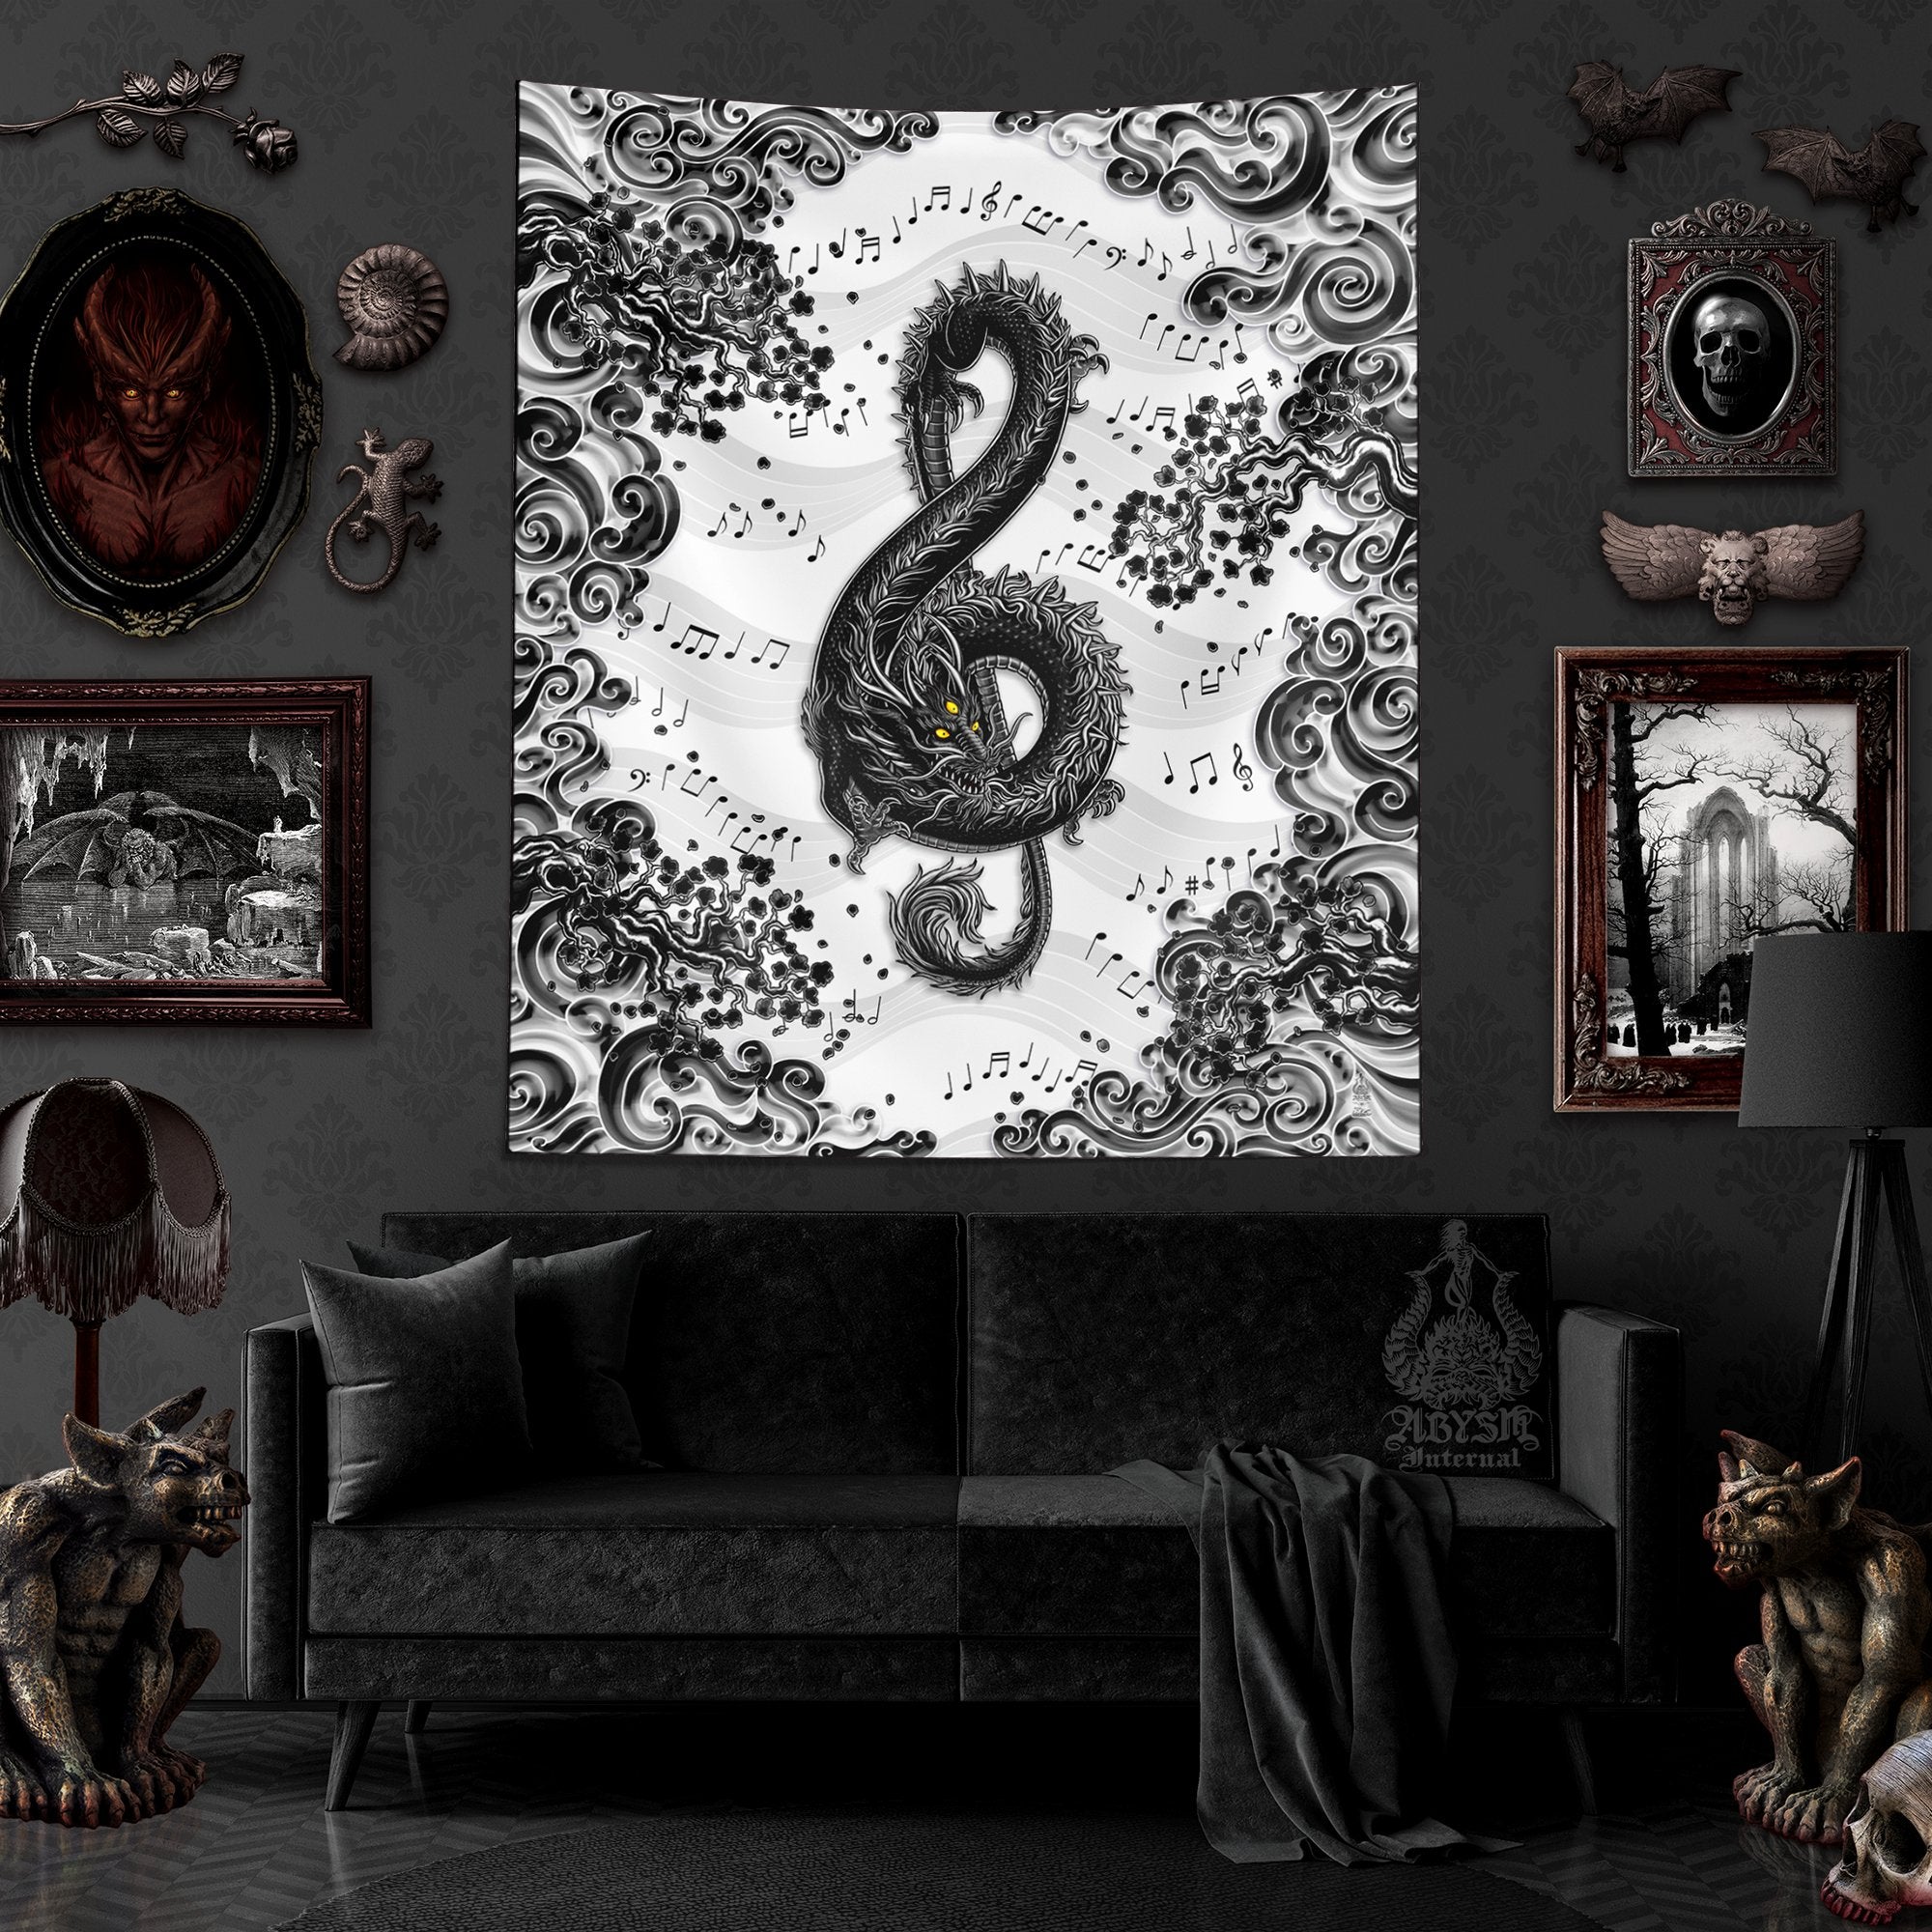 Dragon Tapestry, Music Wall Hanging, Gothic Home Decor, Vertical Art Print - White Goth, Treble Clef - Abysm Internal